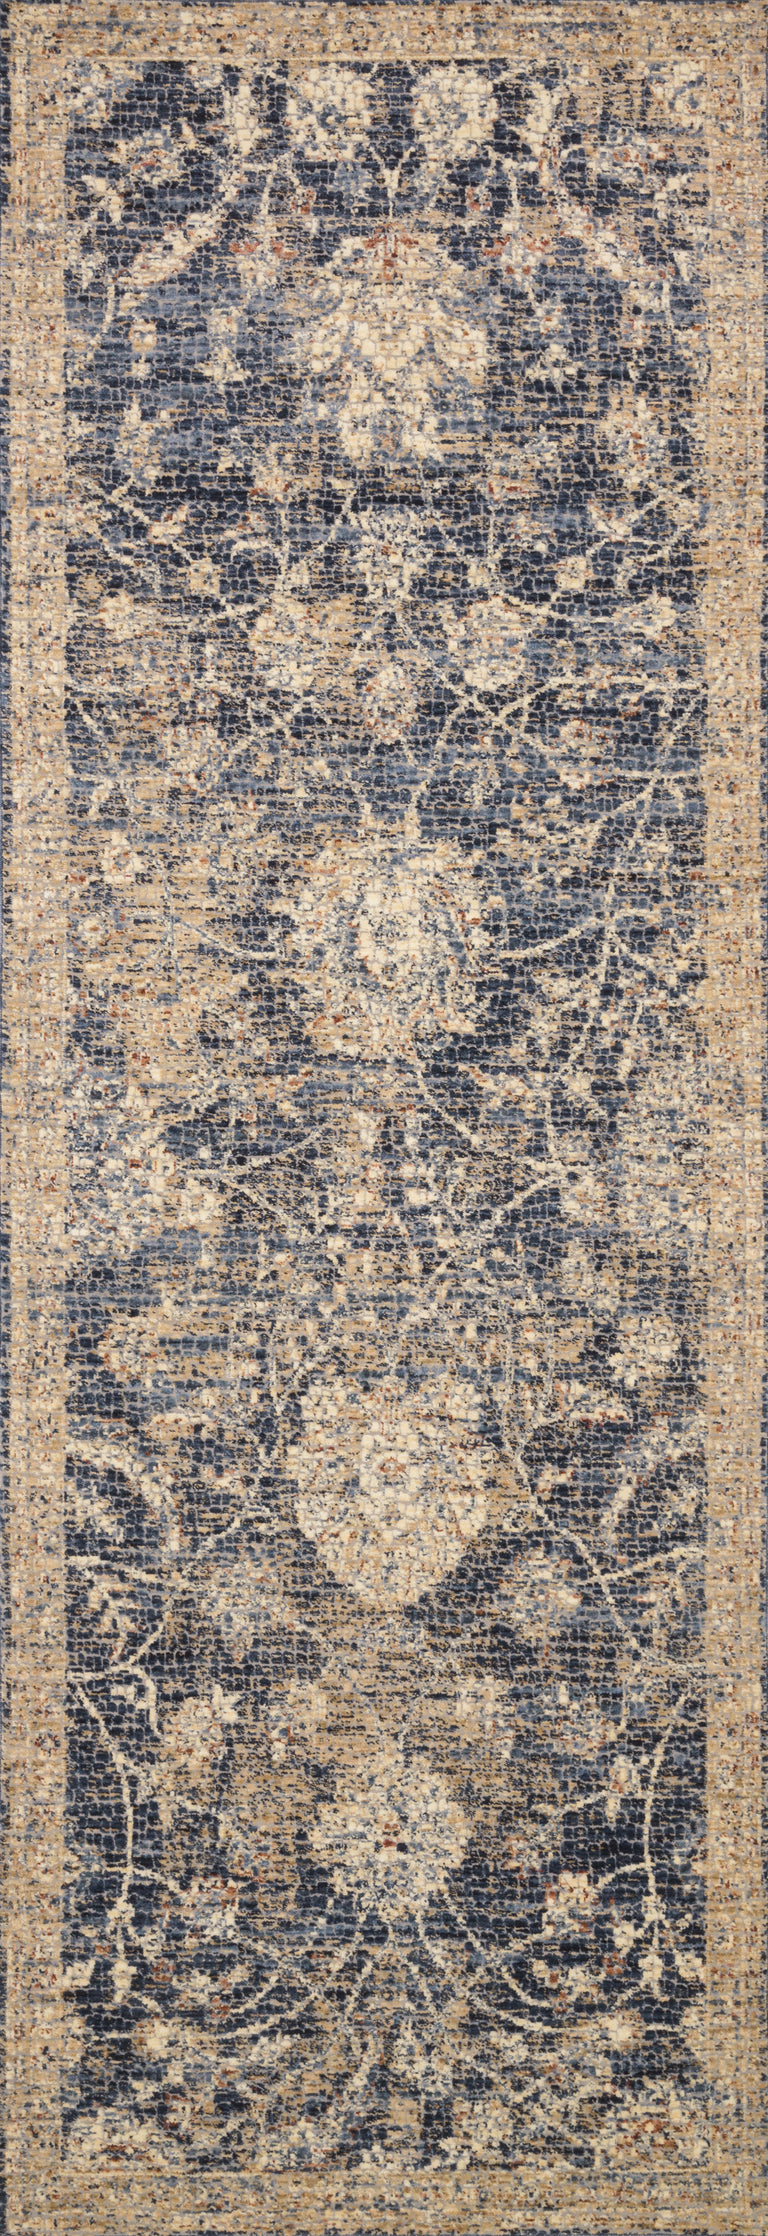 Loloi Rugs Porcia Collection Rug in Blue, Beige - 12'0" x 15'0"